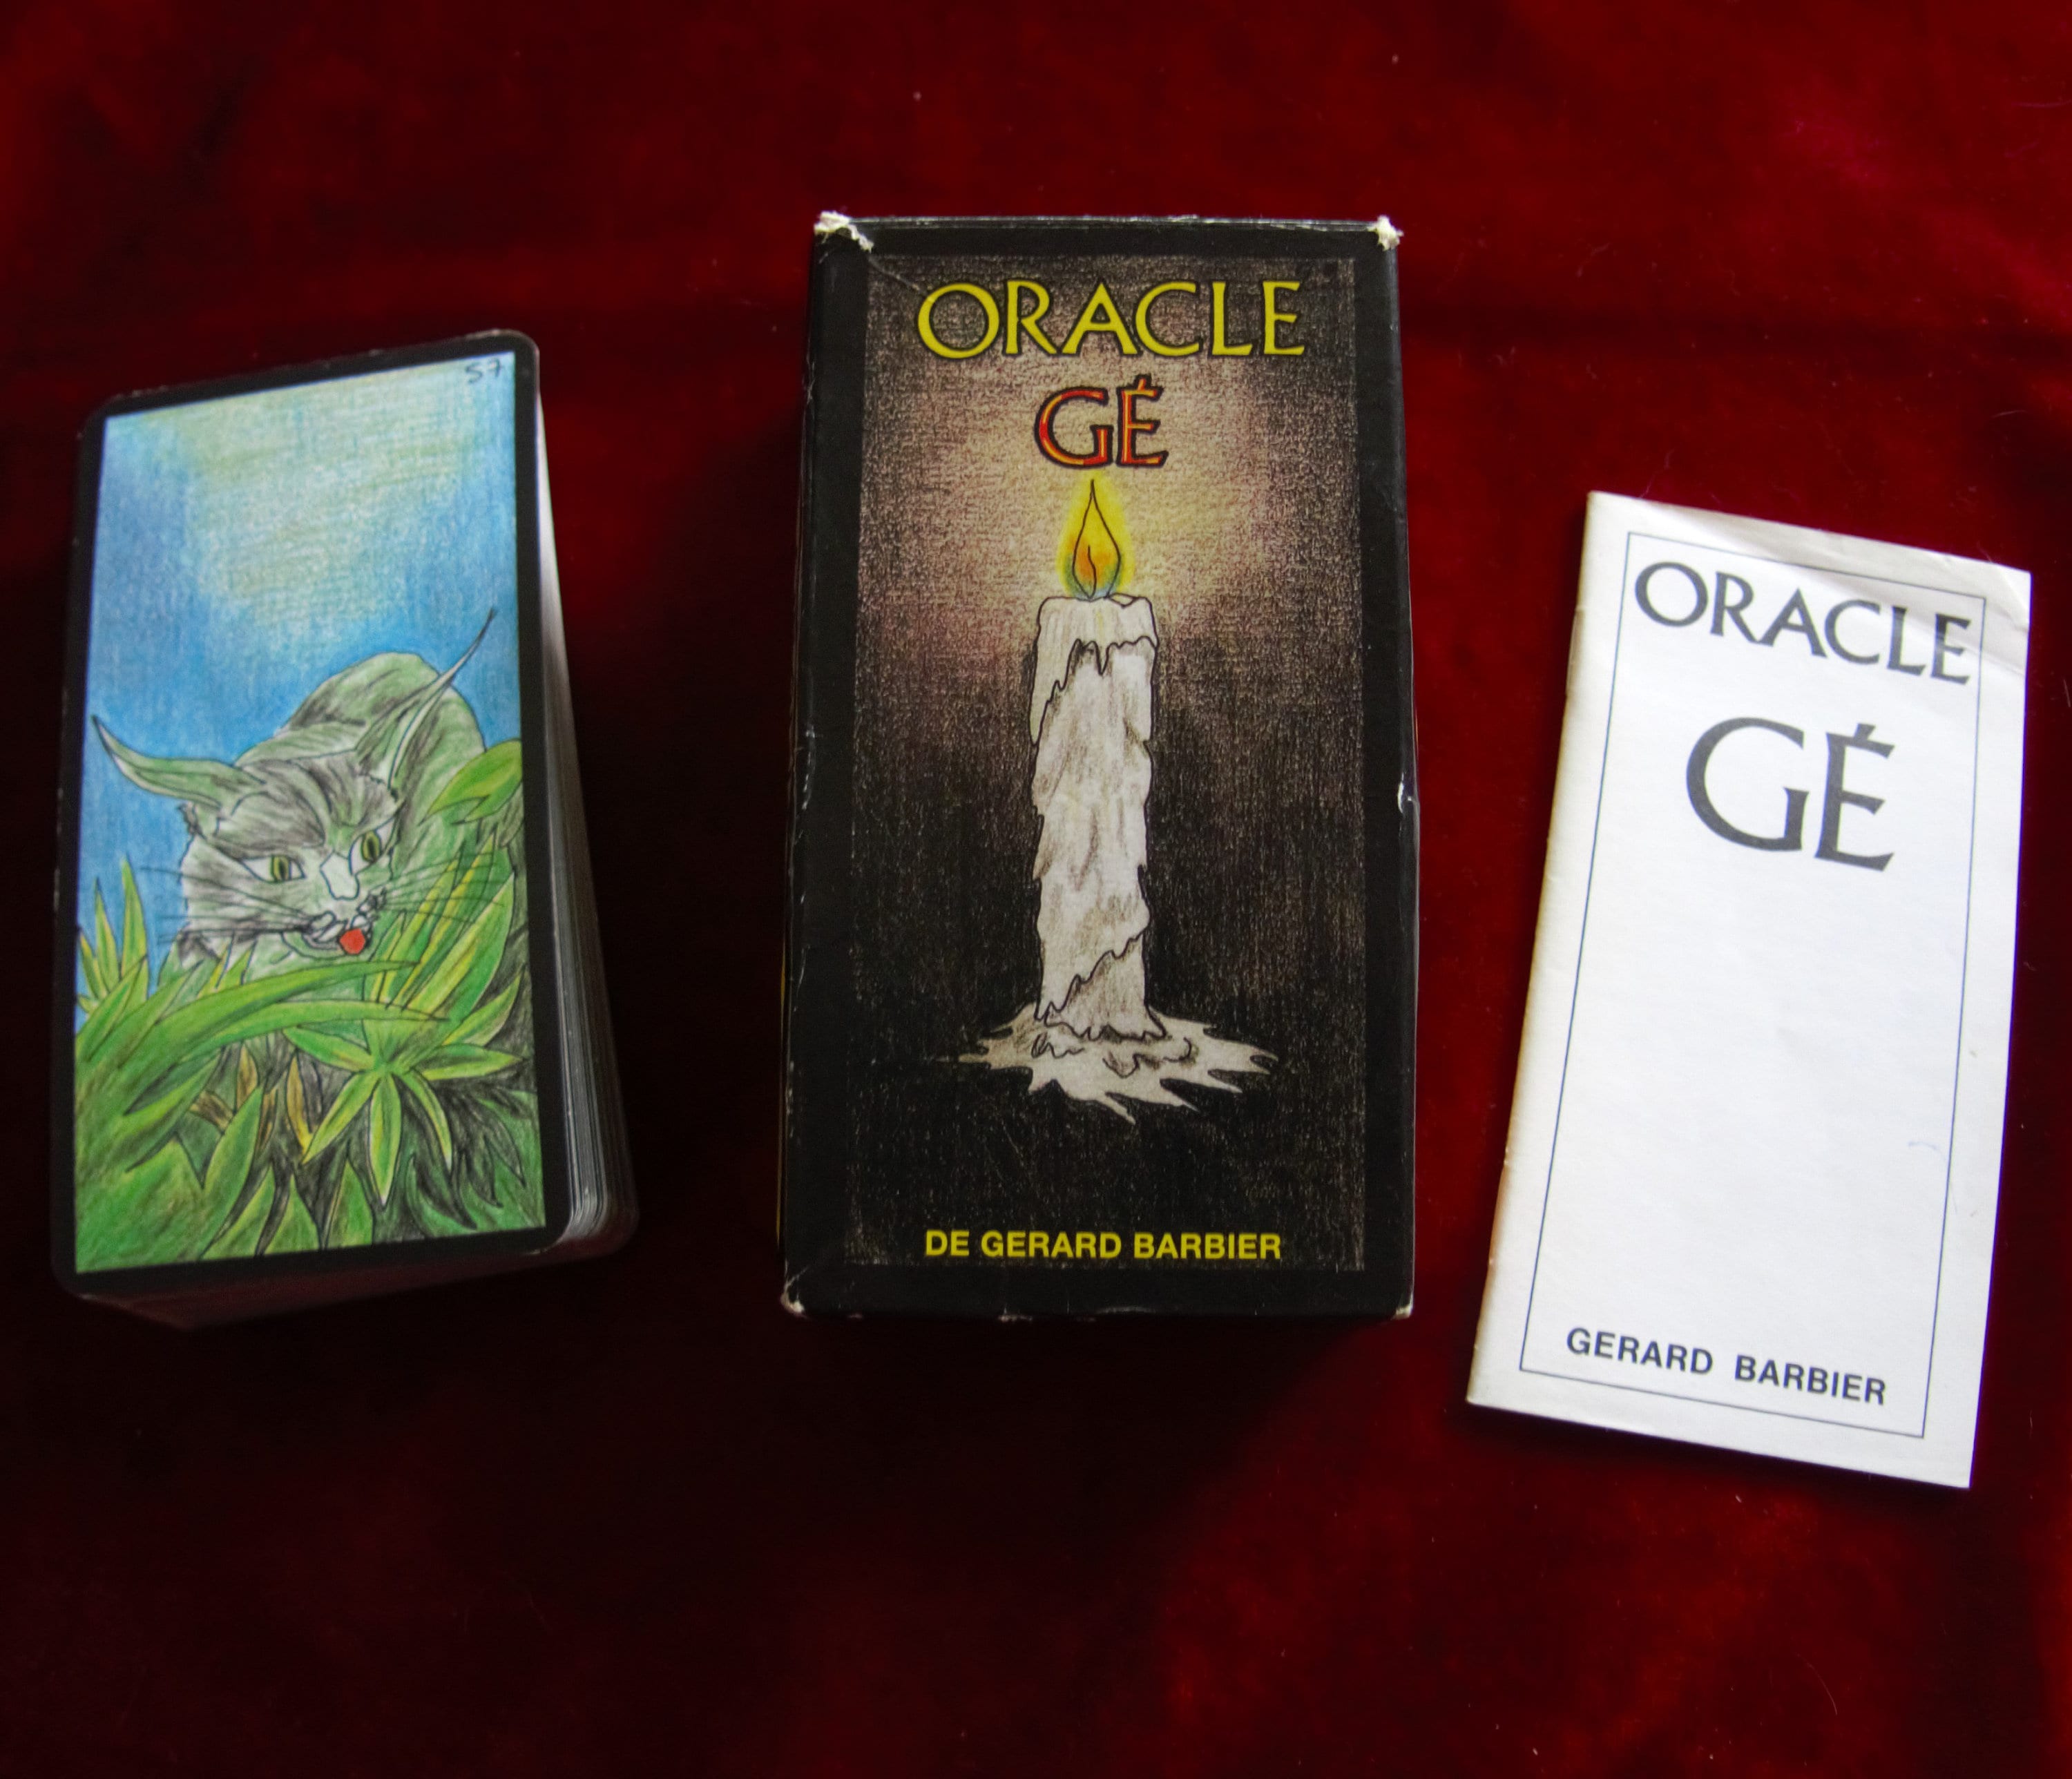 Oracle - L'oracle Gé - Espace Aether